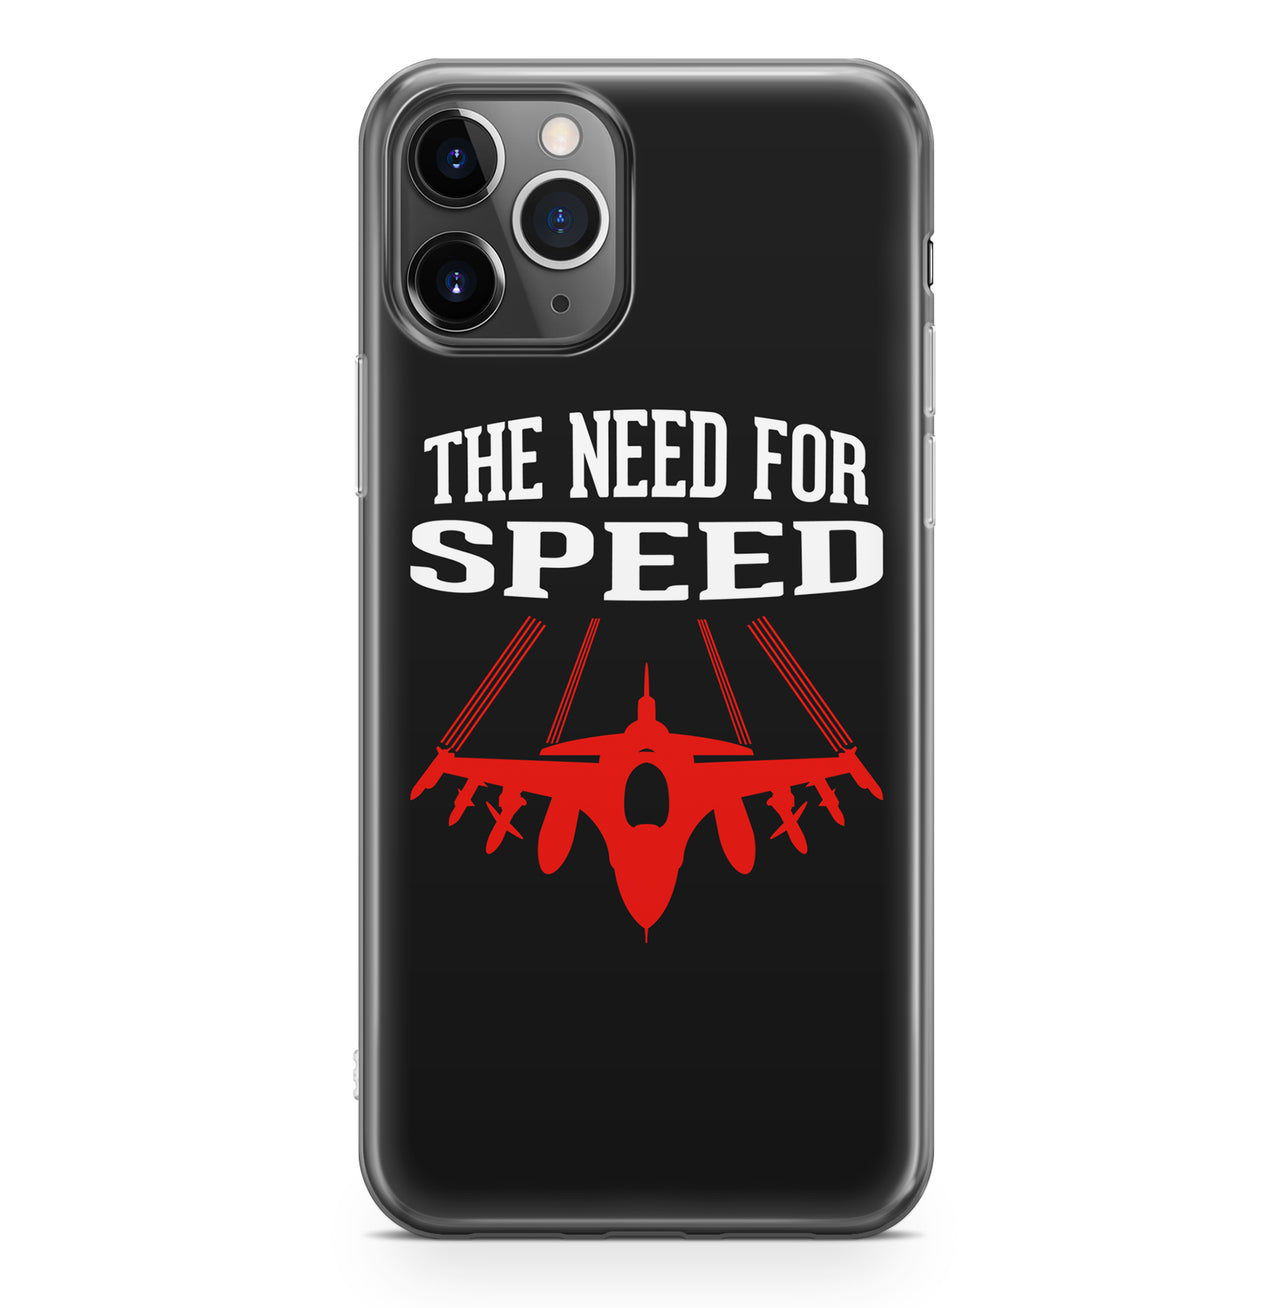 The Need For Speed Designed iPhone Cases